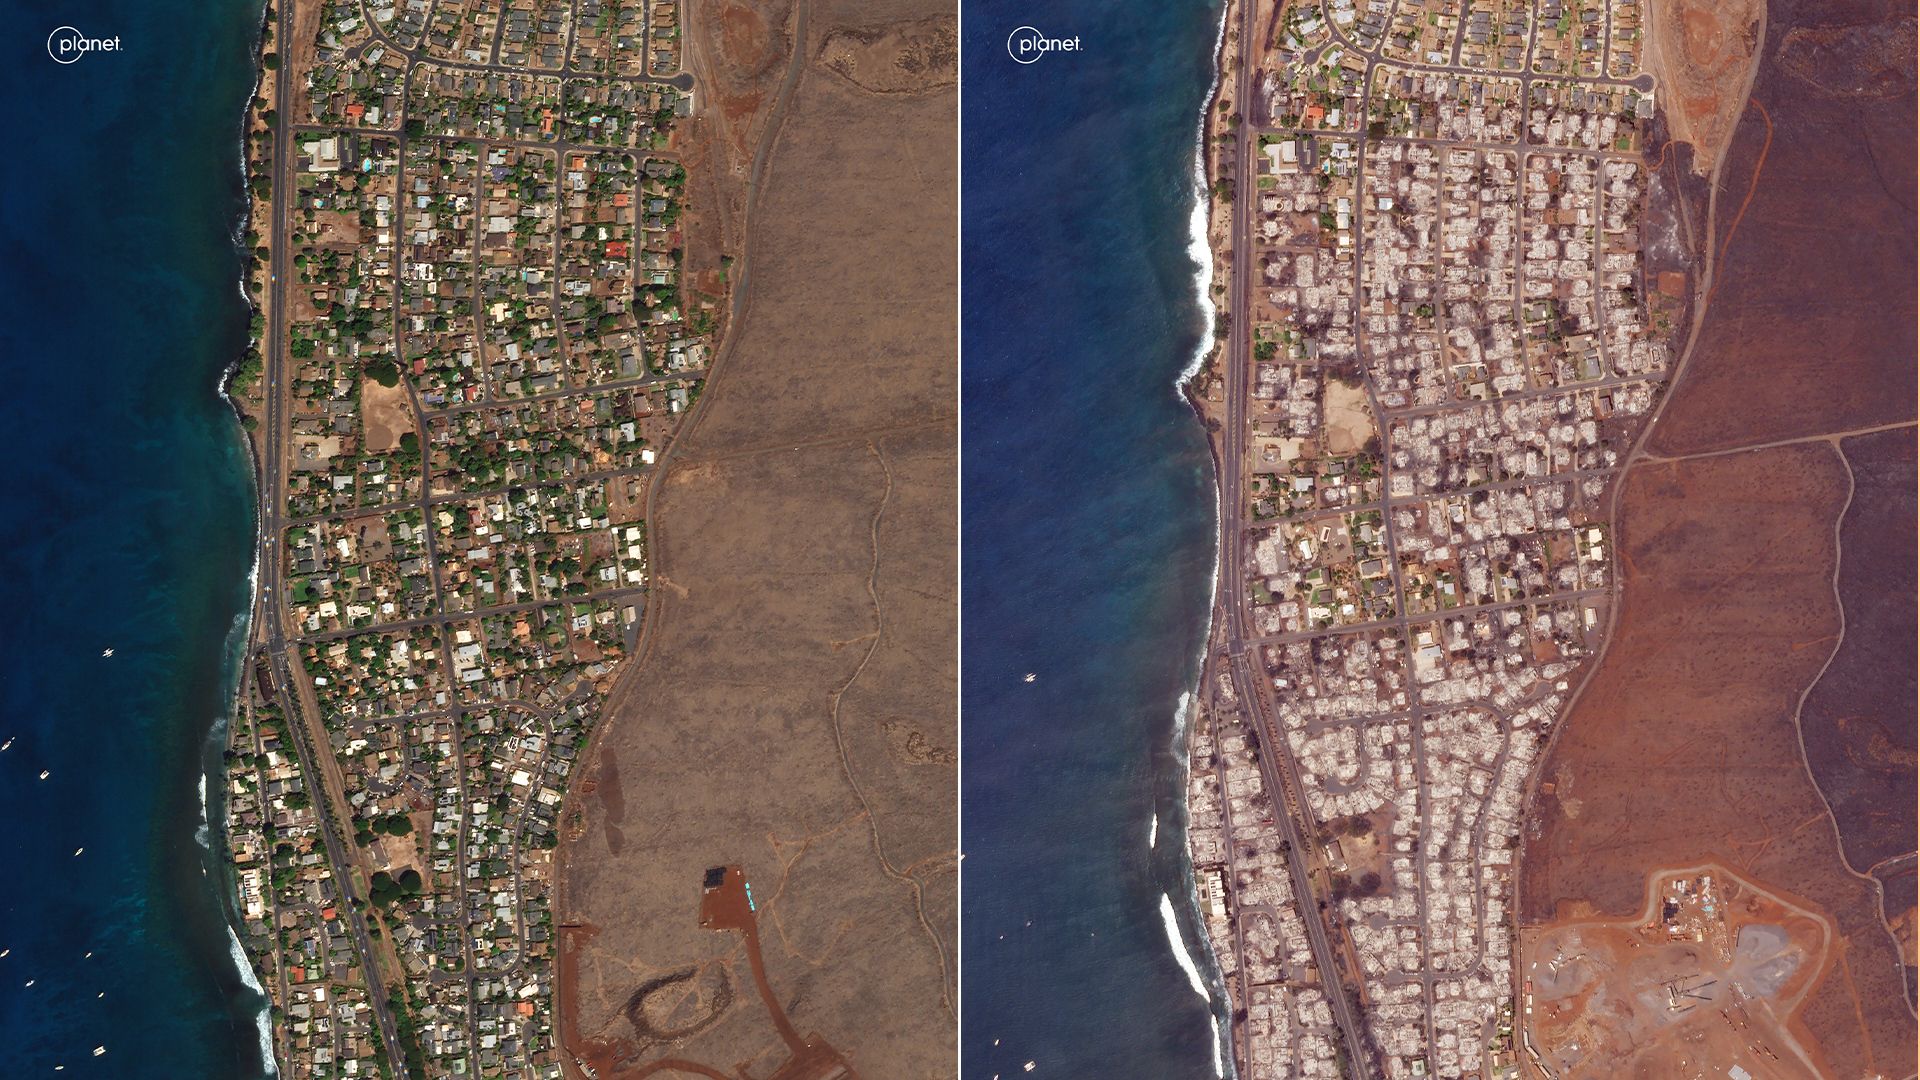 Overview of Lahaina before and after wildfires